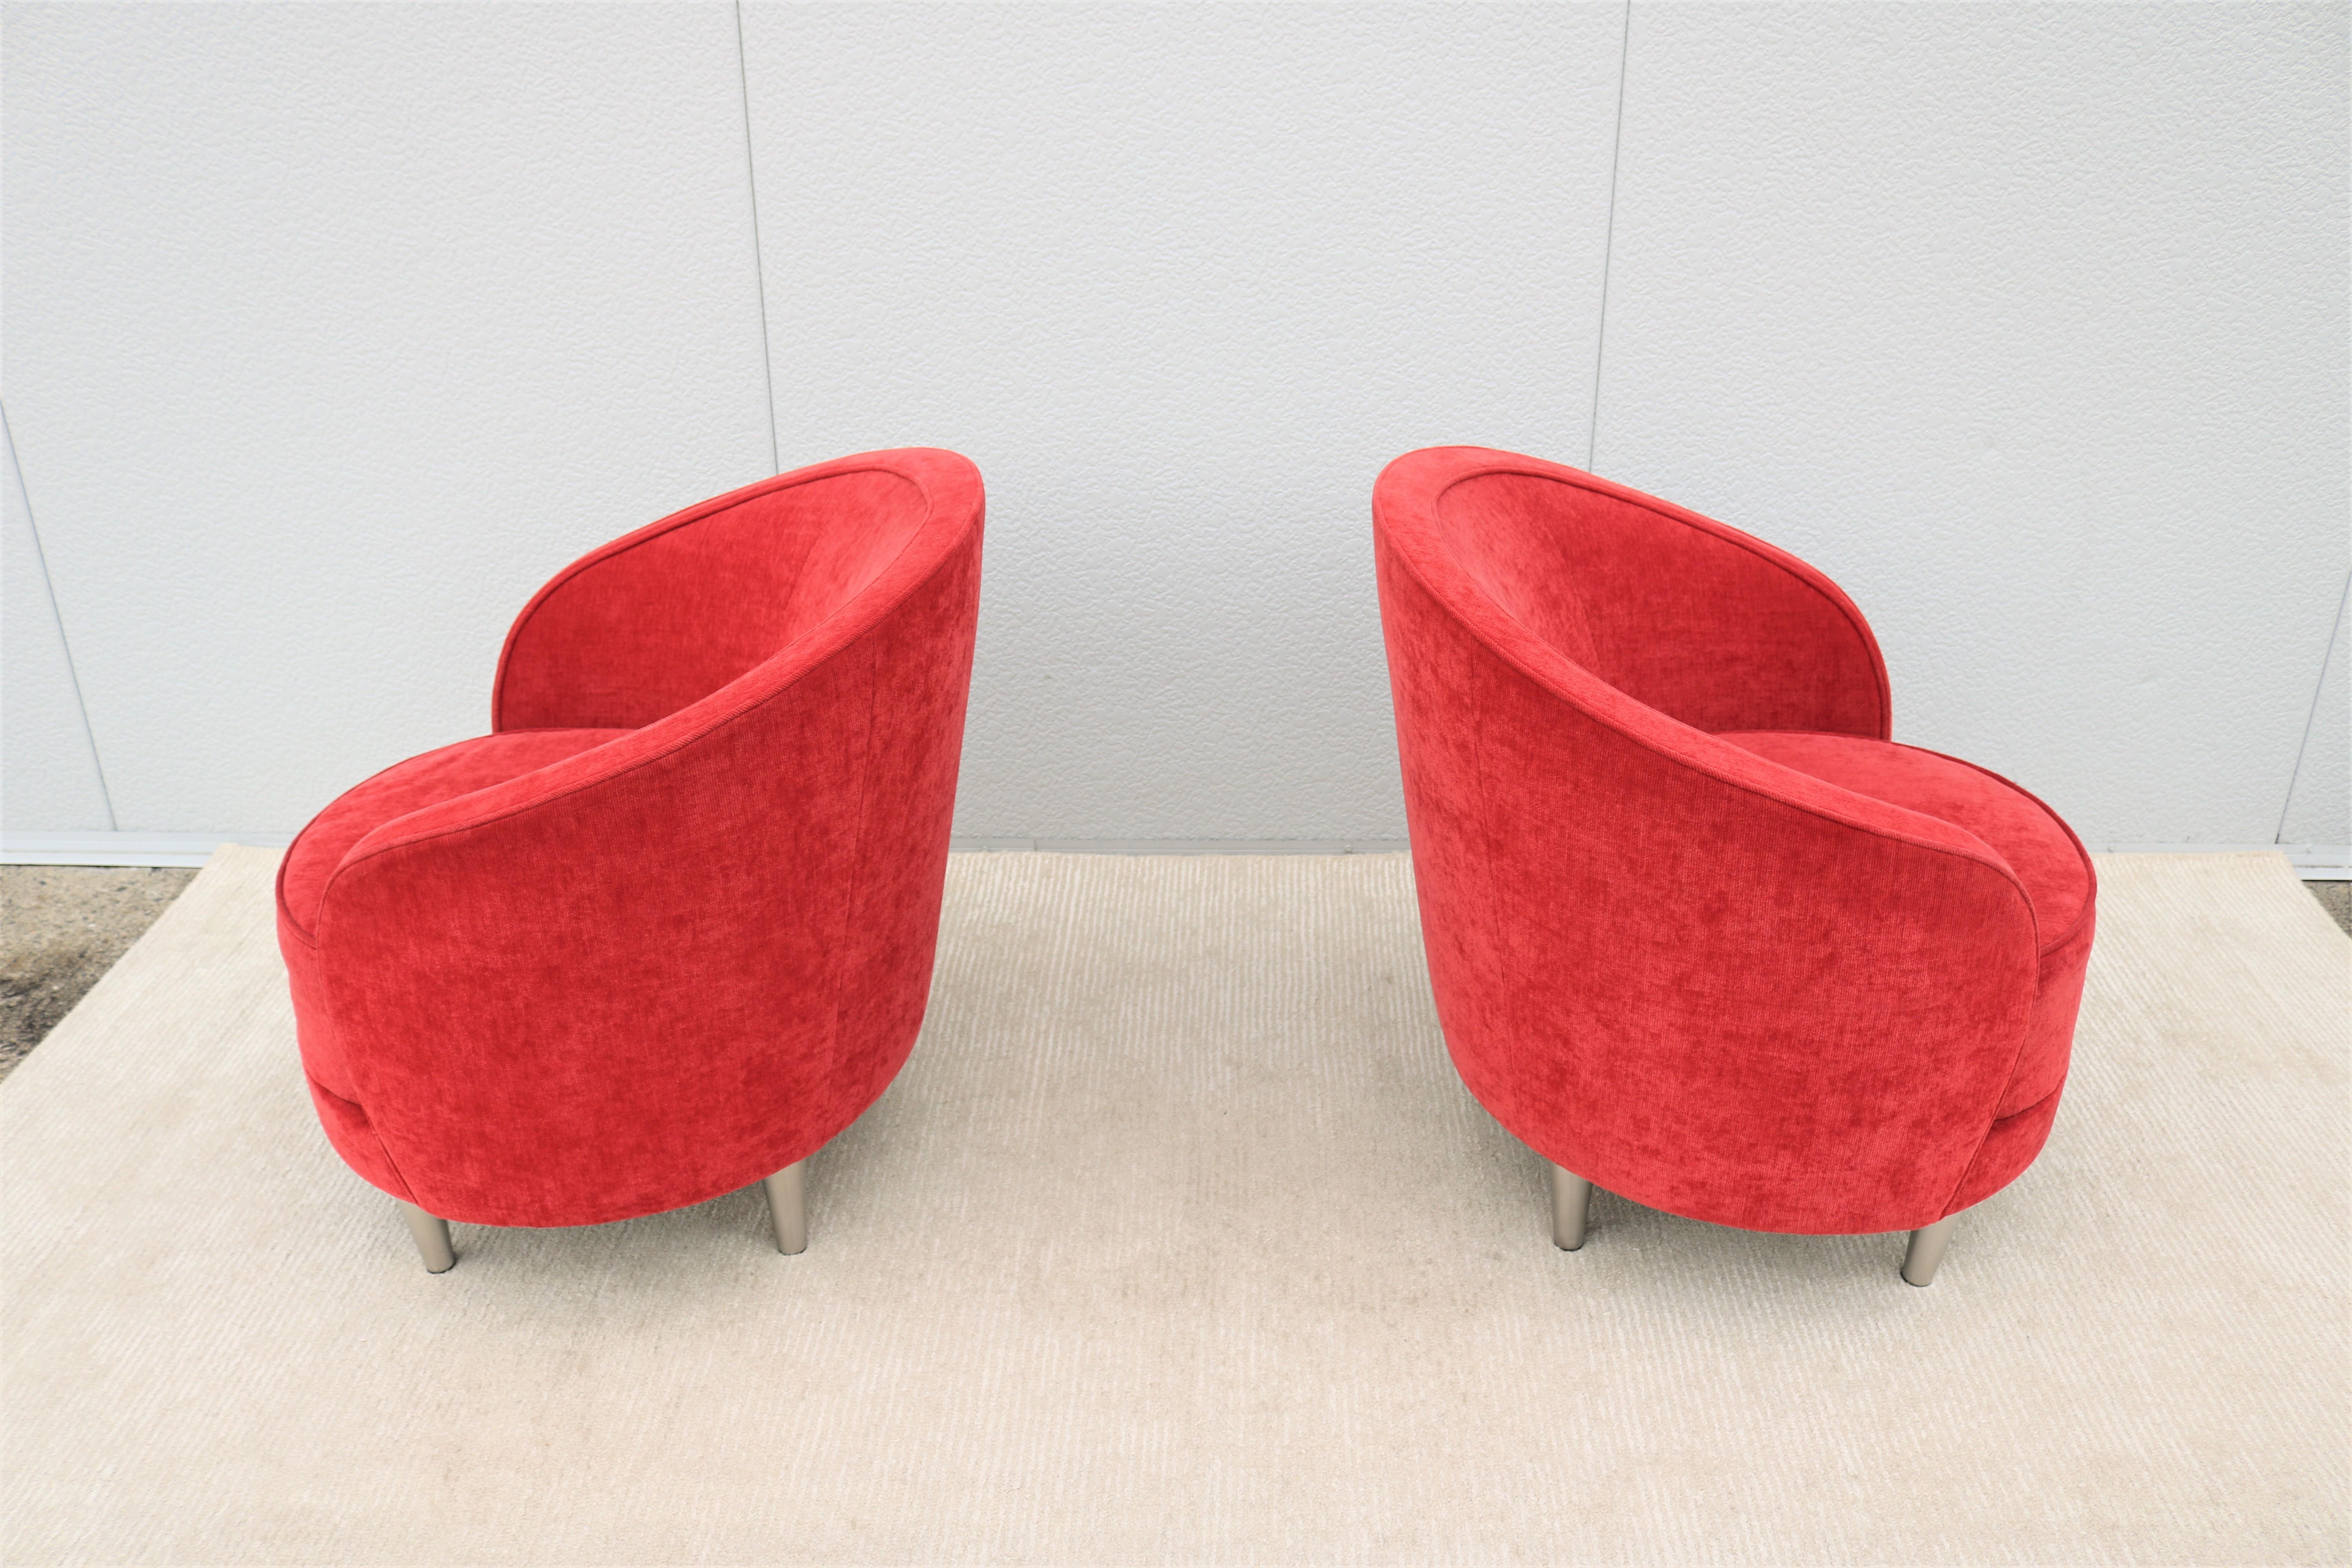 Contemporary Modern Martin Brattrud Kinsale Red Barrel Lounge Chairs, a Pair For Sale 1